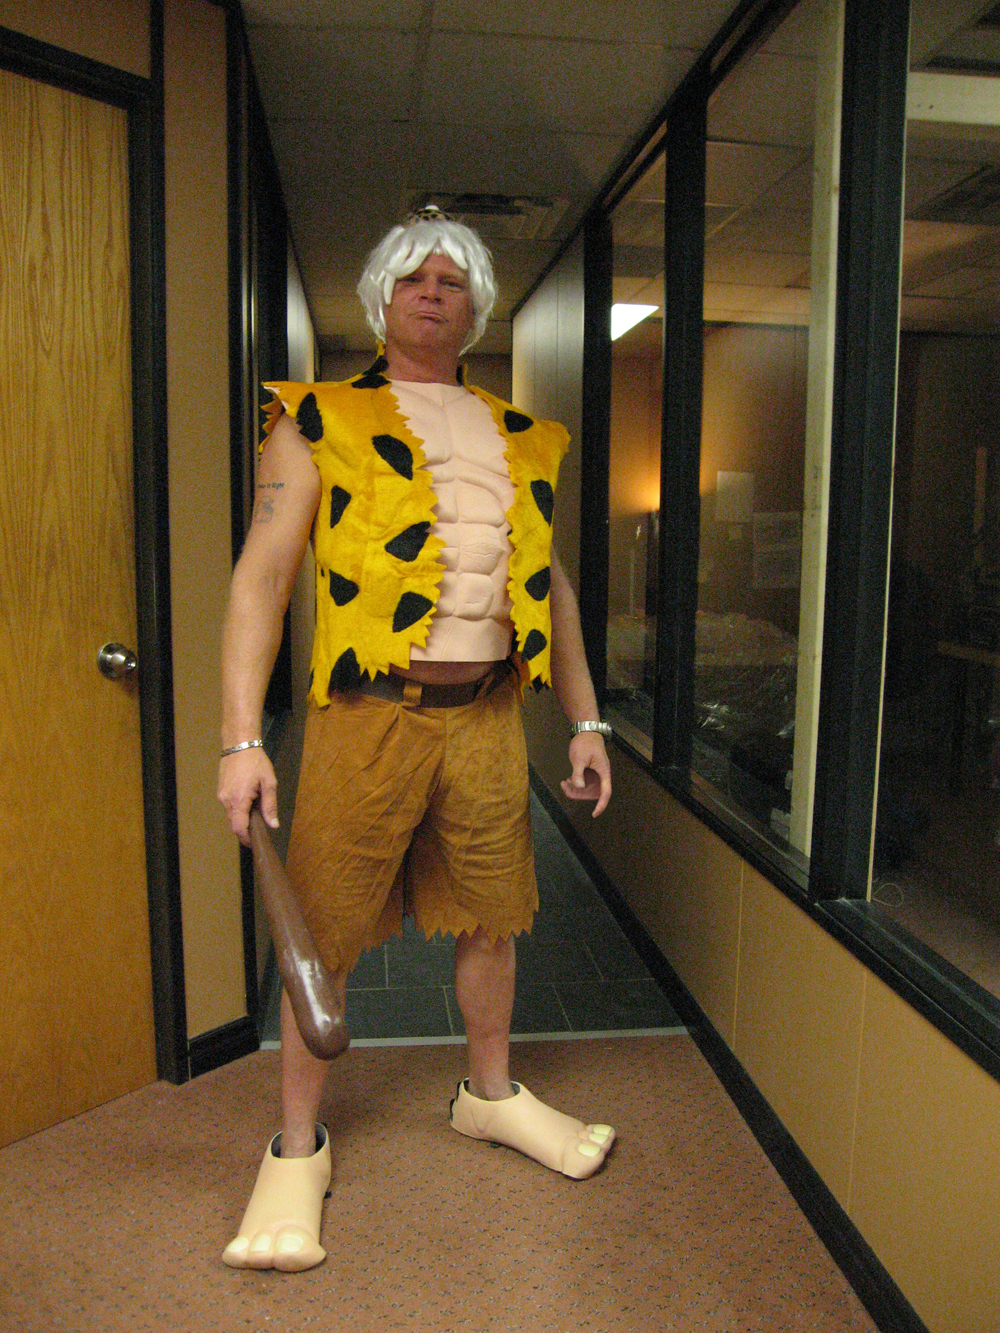 Mike Holmes dressed up as Fred from The Flinstones